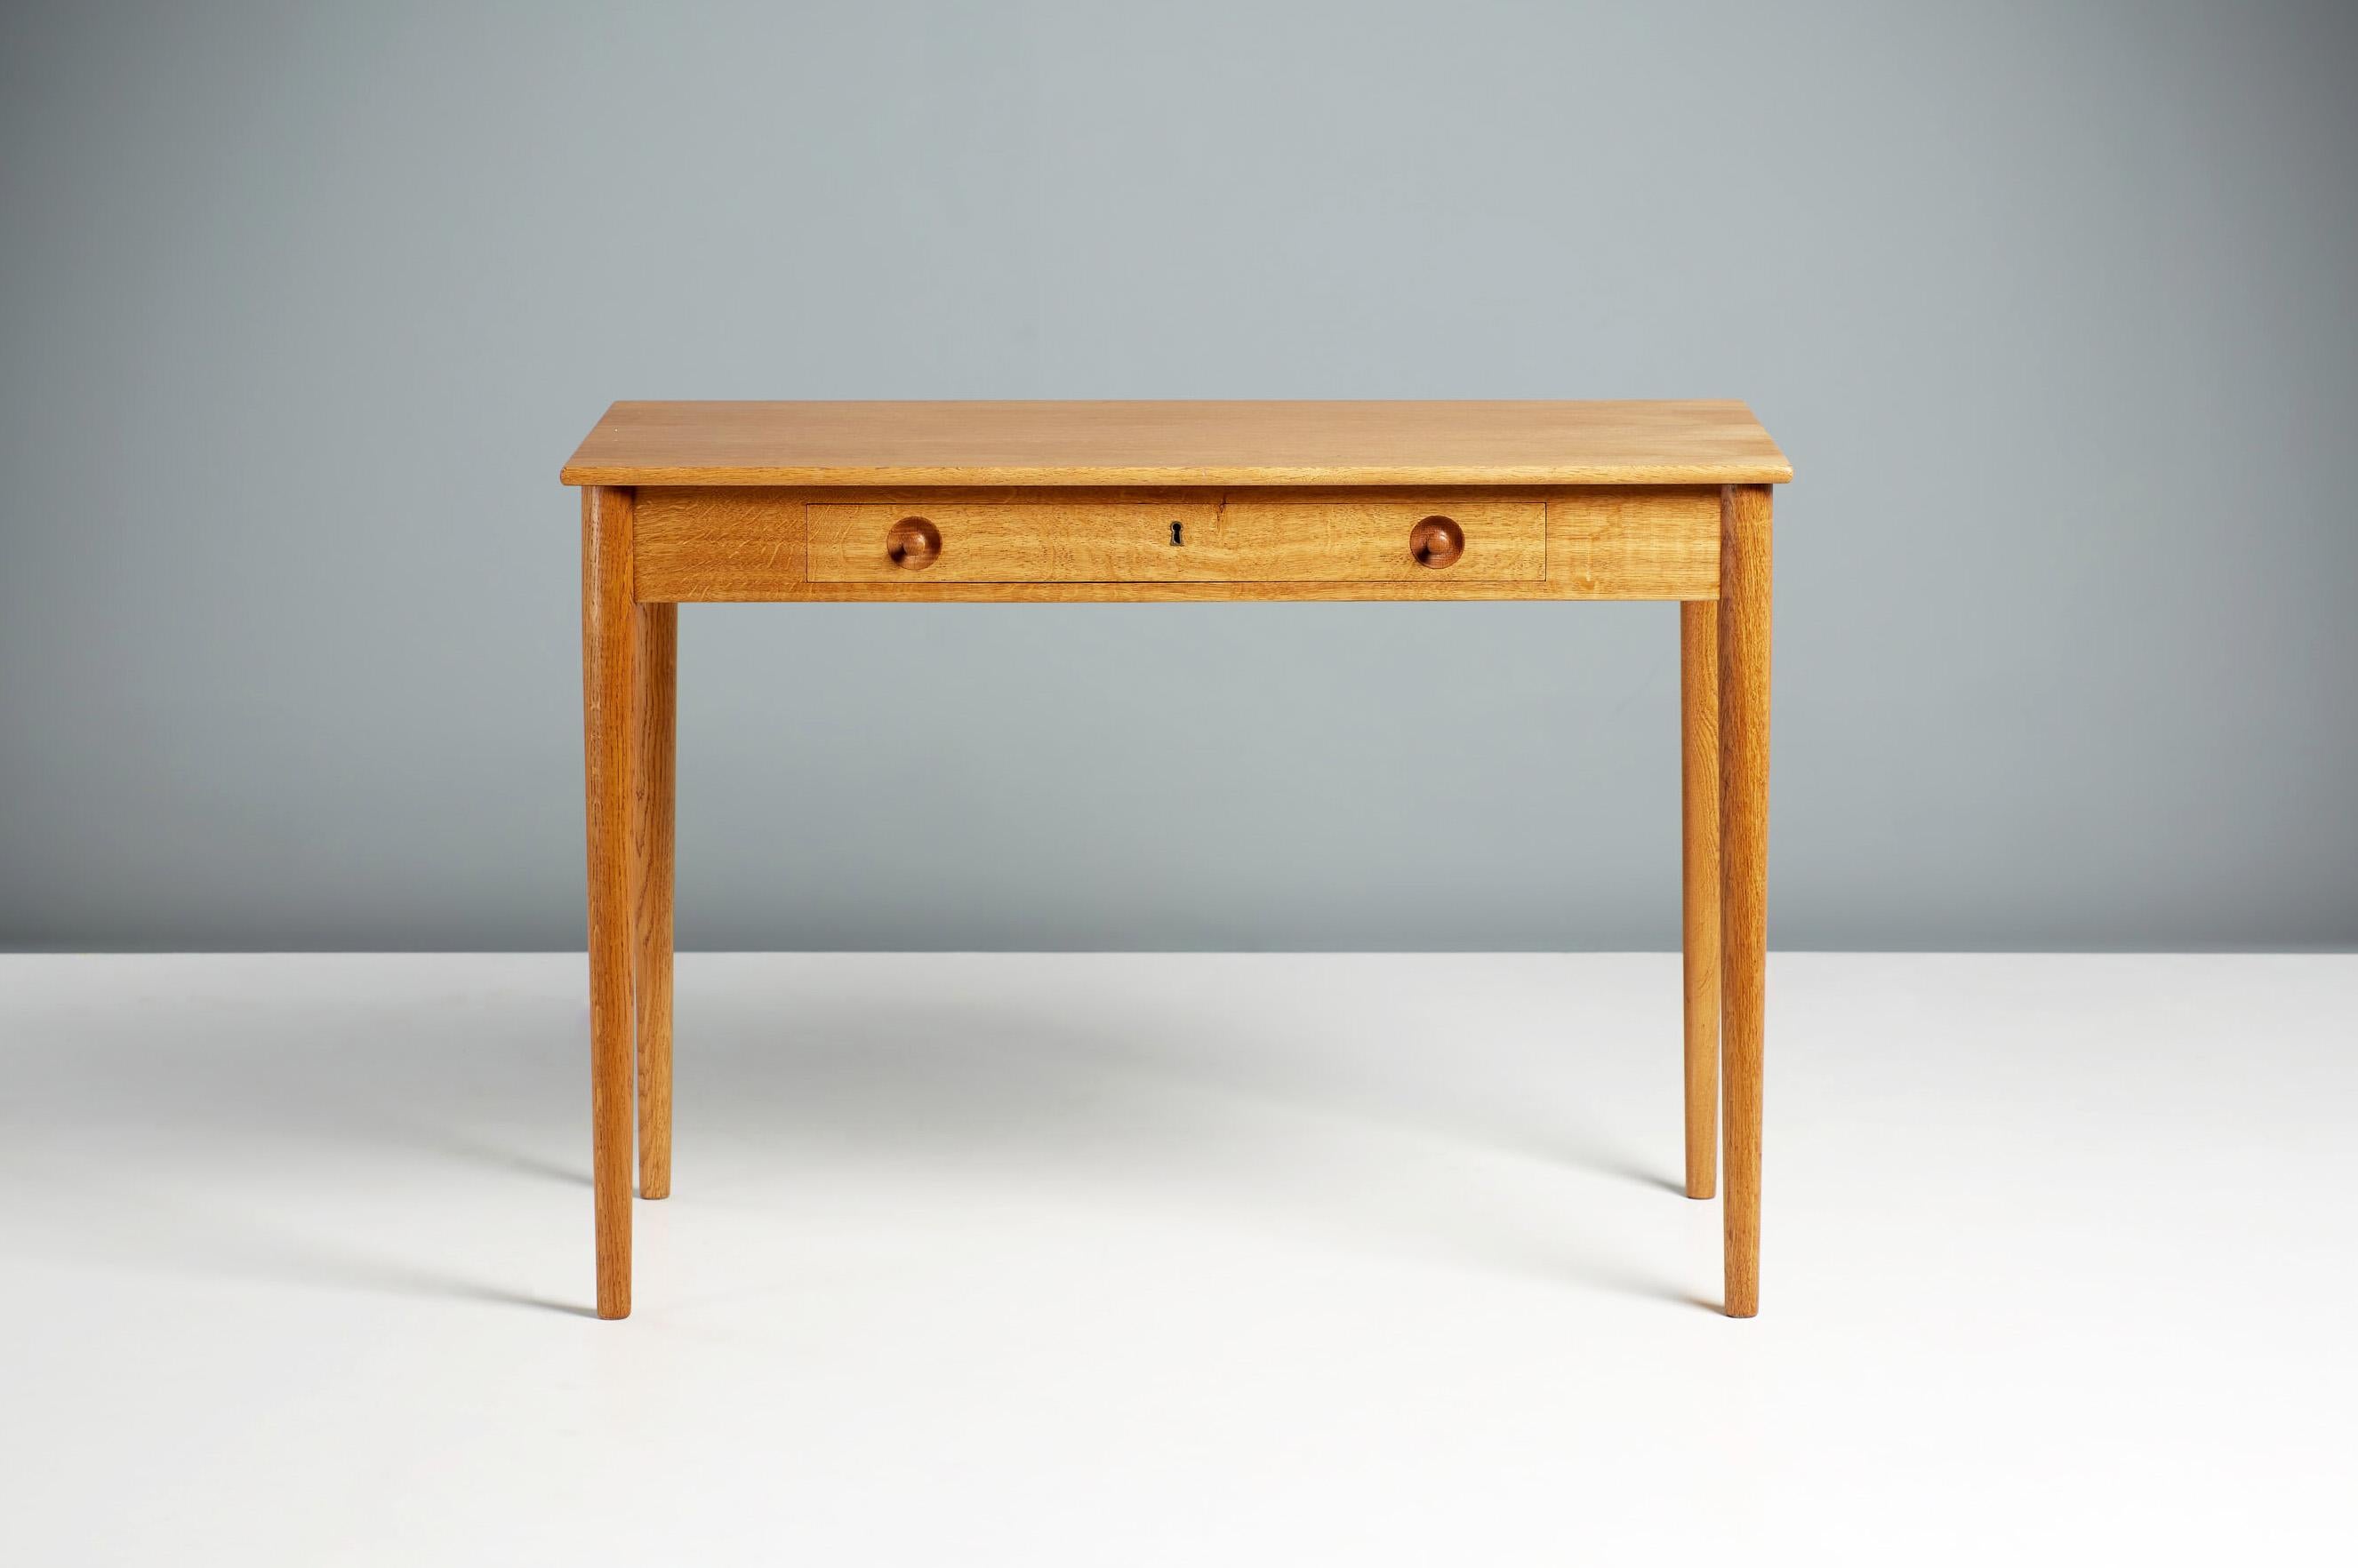 Hans Wegner RY-32 desk, circa 1960.

Oak desk from Danish icon Hans Wegner produced by Ry Mobler. The legs, drawers and frame are made from solid, patinated oak whilst the top is oak veneer. Features one lockable drawer and Wegner’s trademark